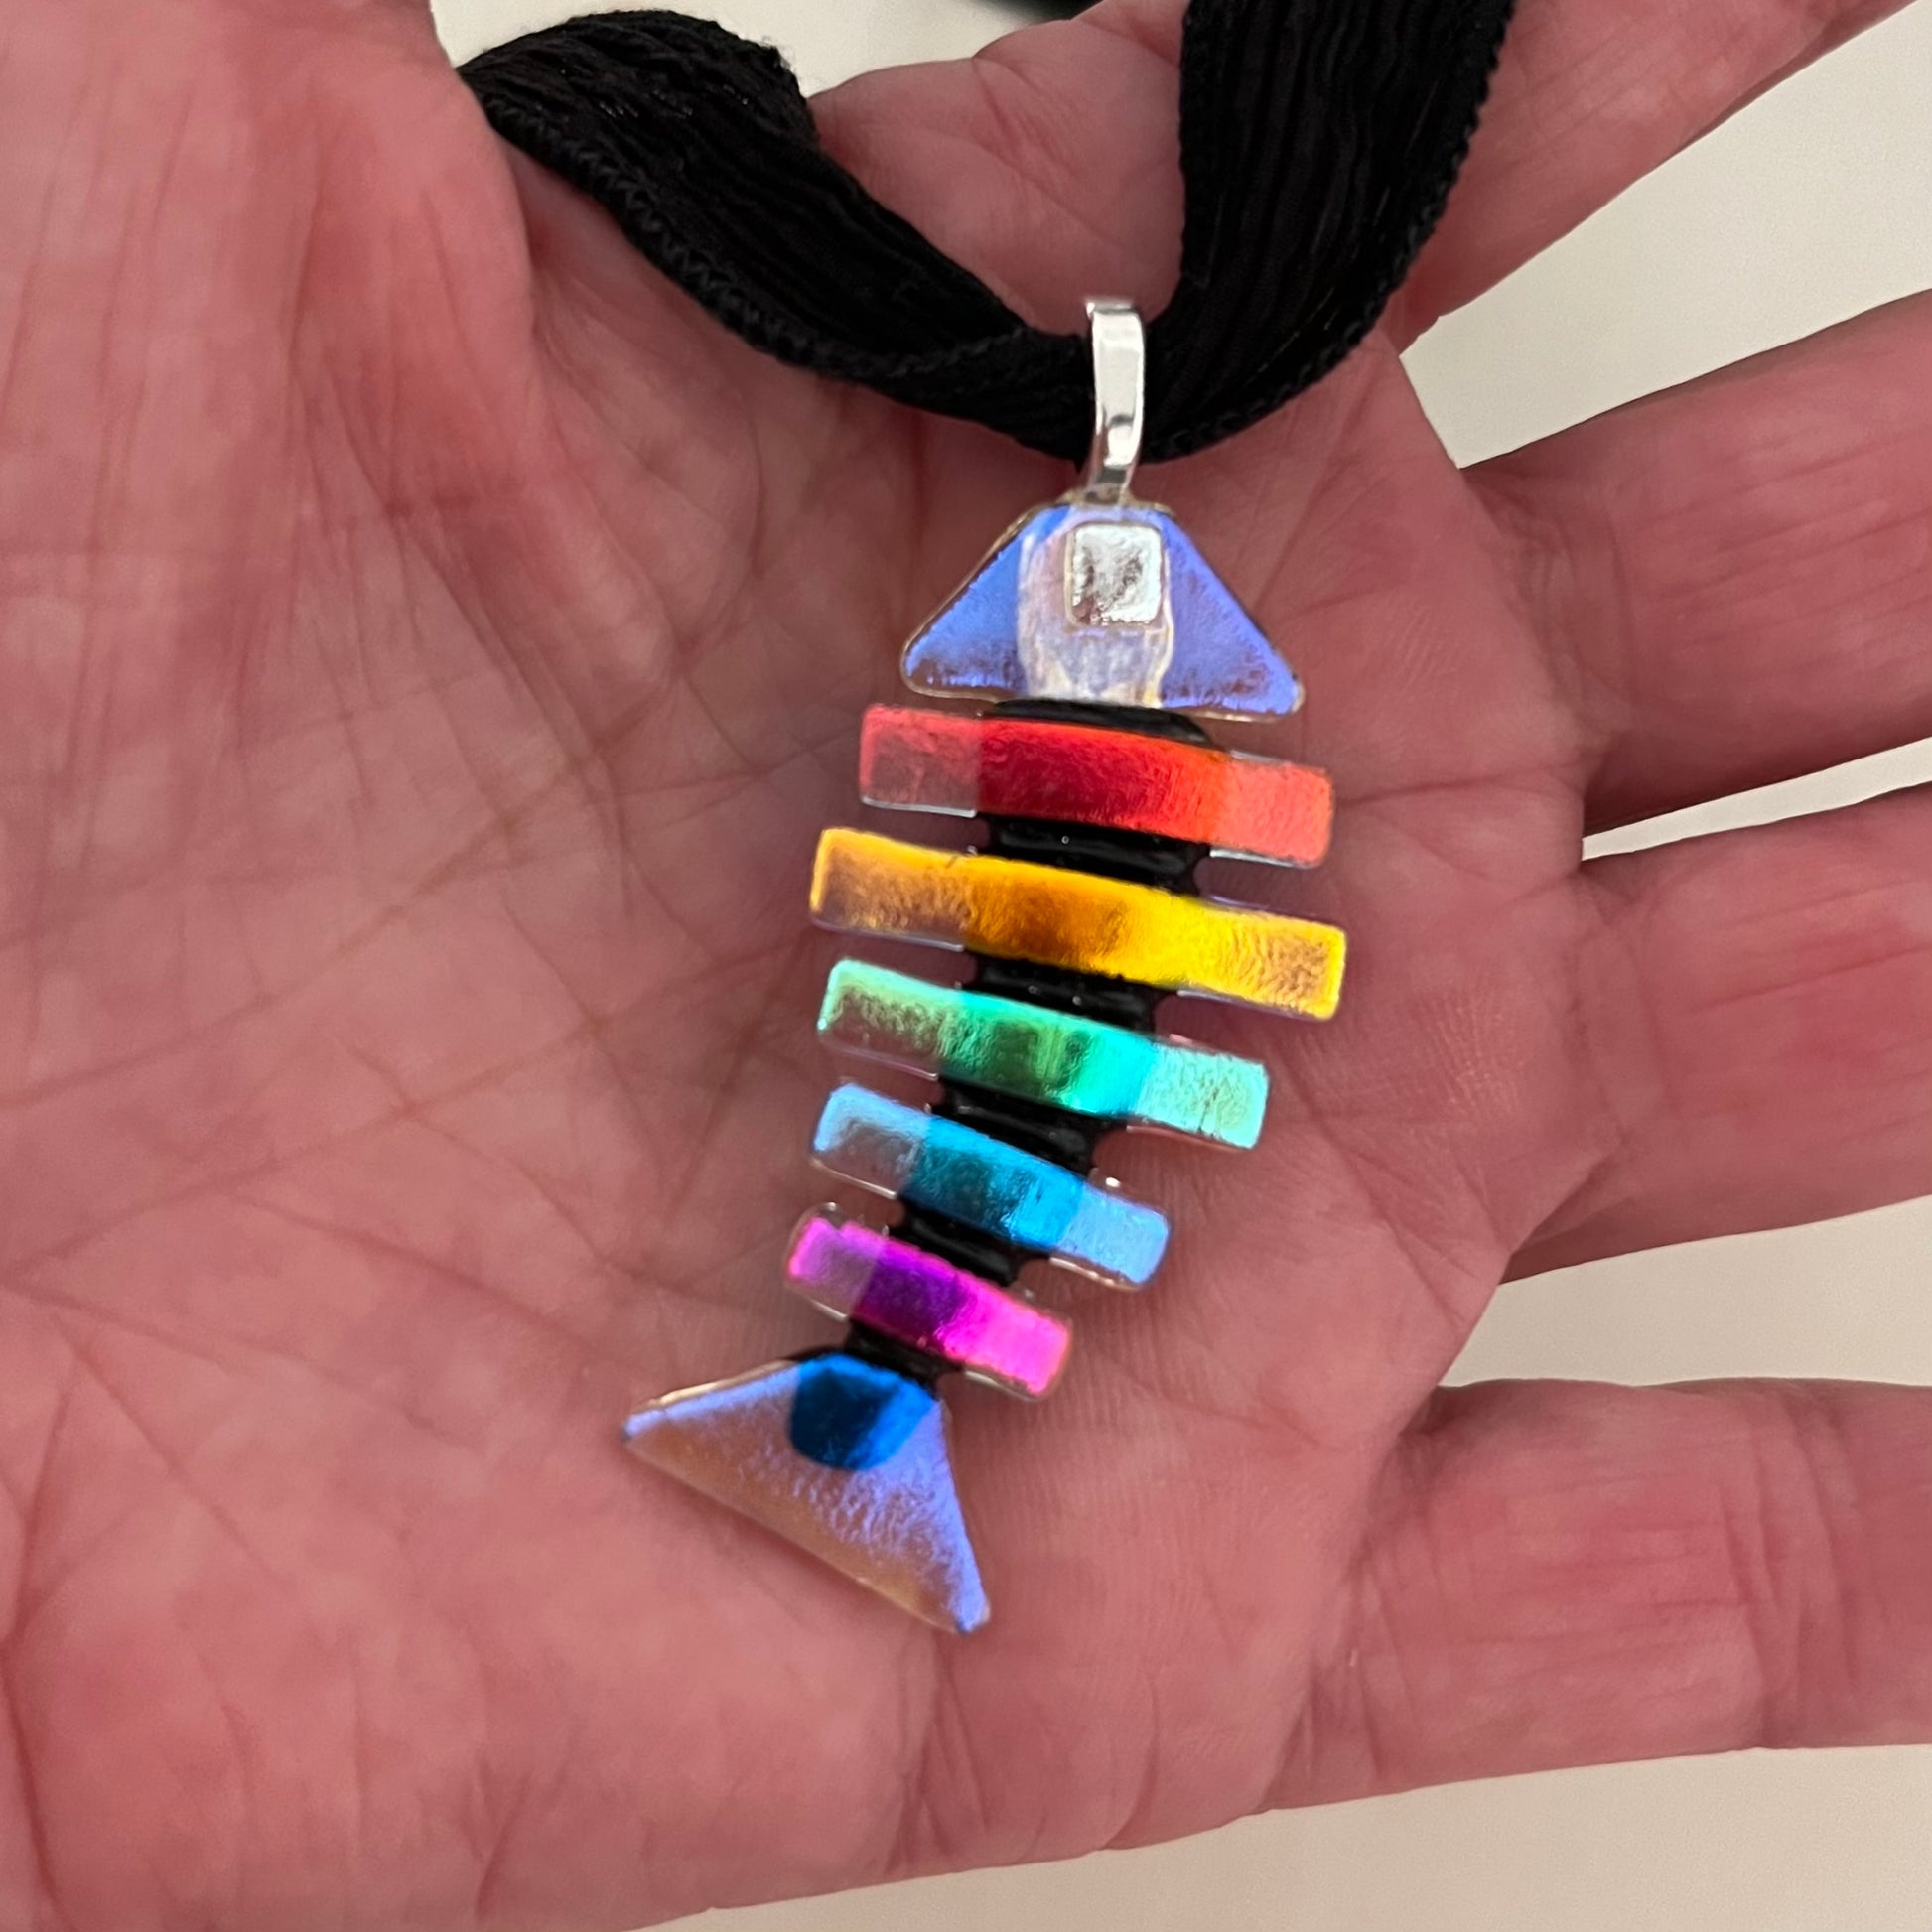 This is a favorite color combo!  Large dichroic fused glass bonefish pendant with black spine, blue head & tail, multi-colored ribs, 2" in length, silver plated bail. * Chains & cords are not included but are available for purchase.